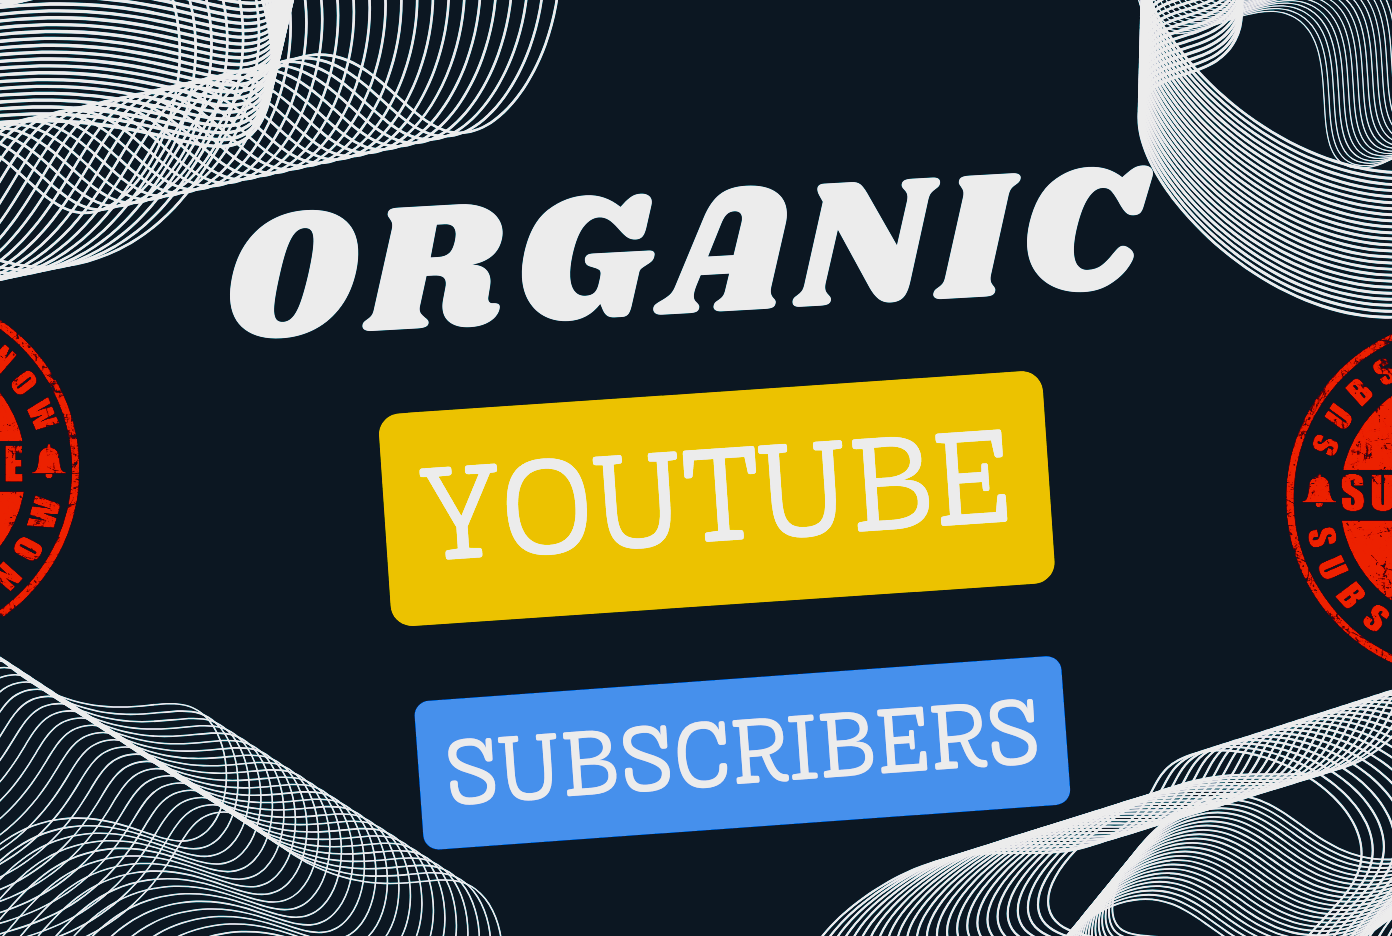 You will get real subscribers and viewers for your YouTube channel